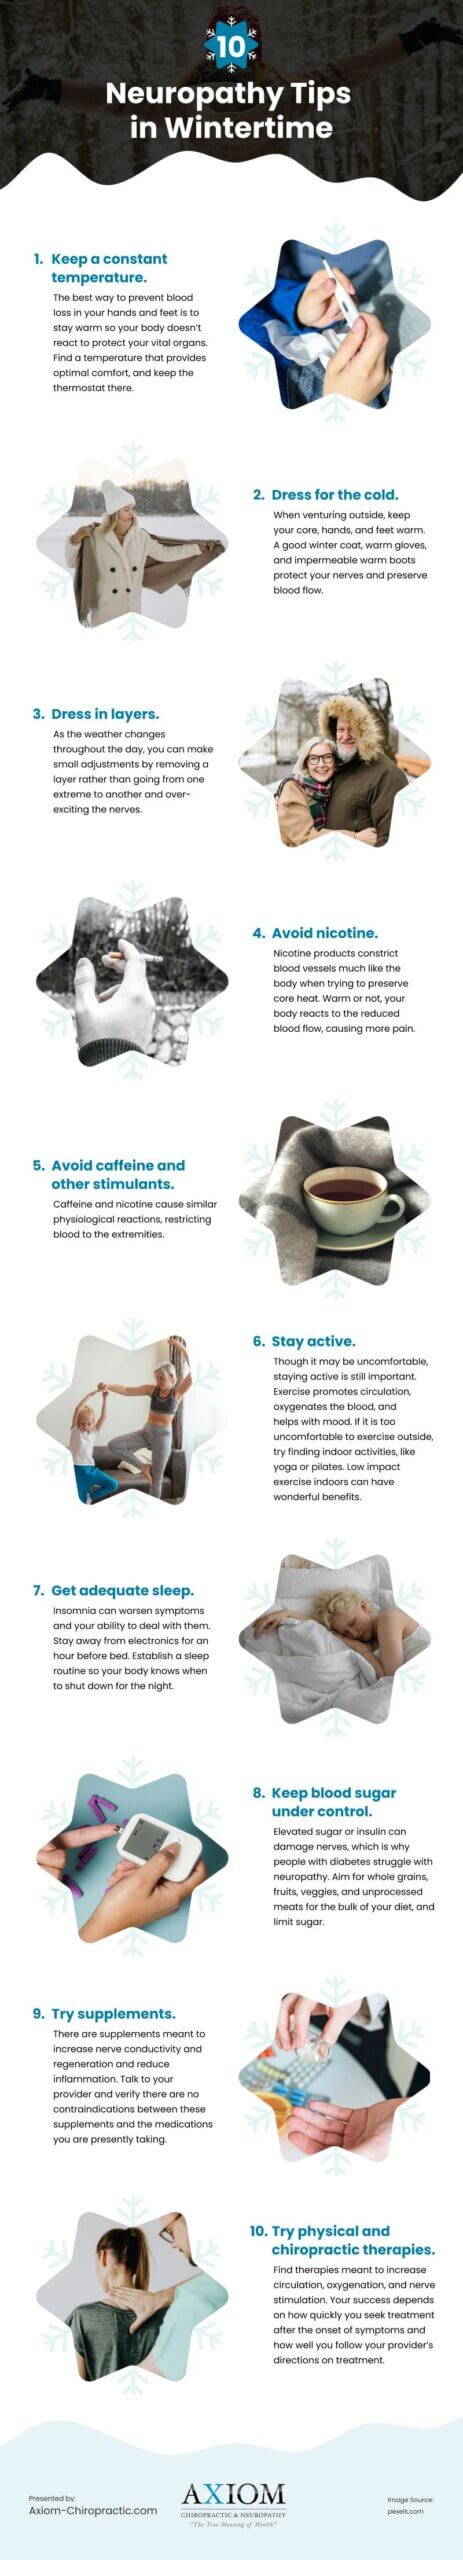 10 Neuropathy Tips in Wintertime Infographic